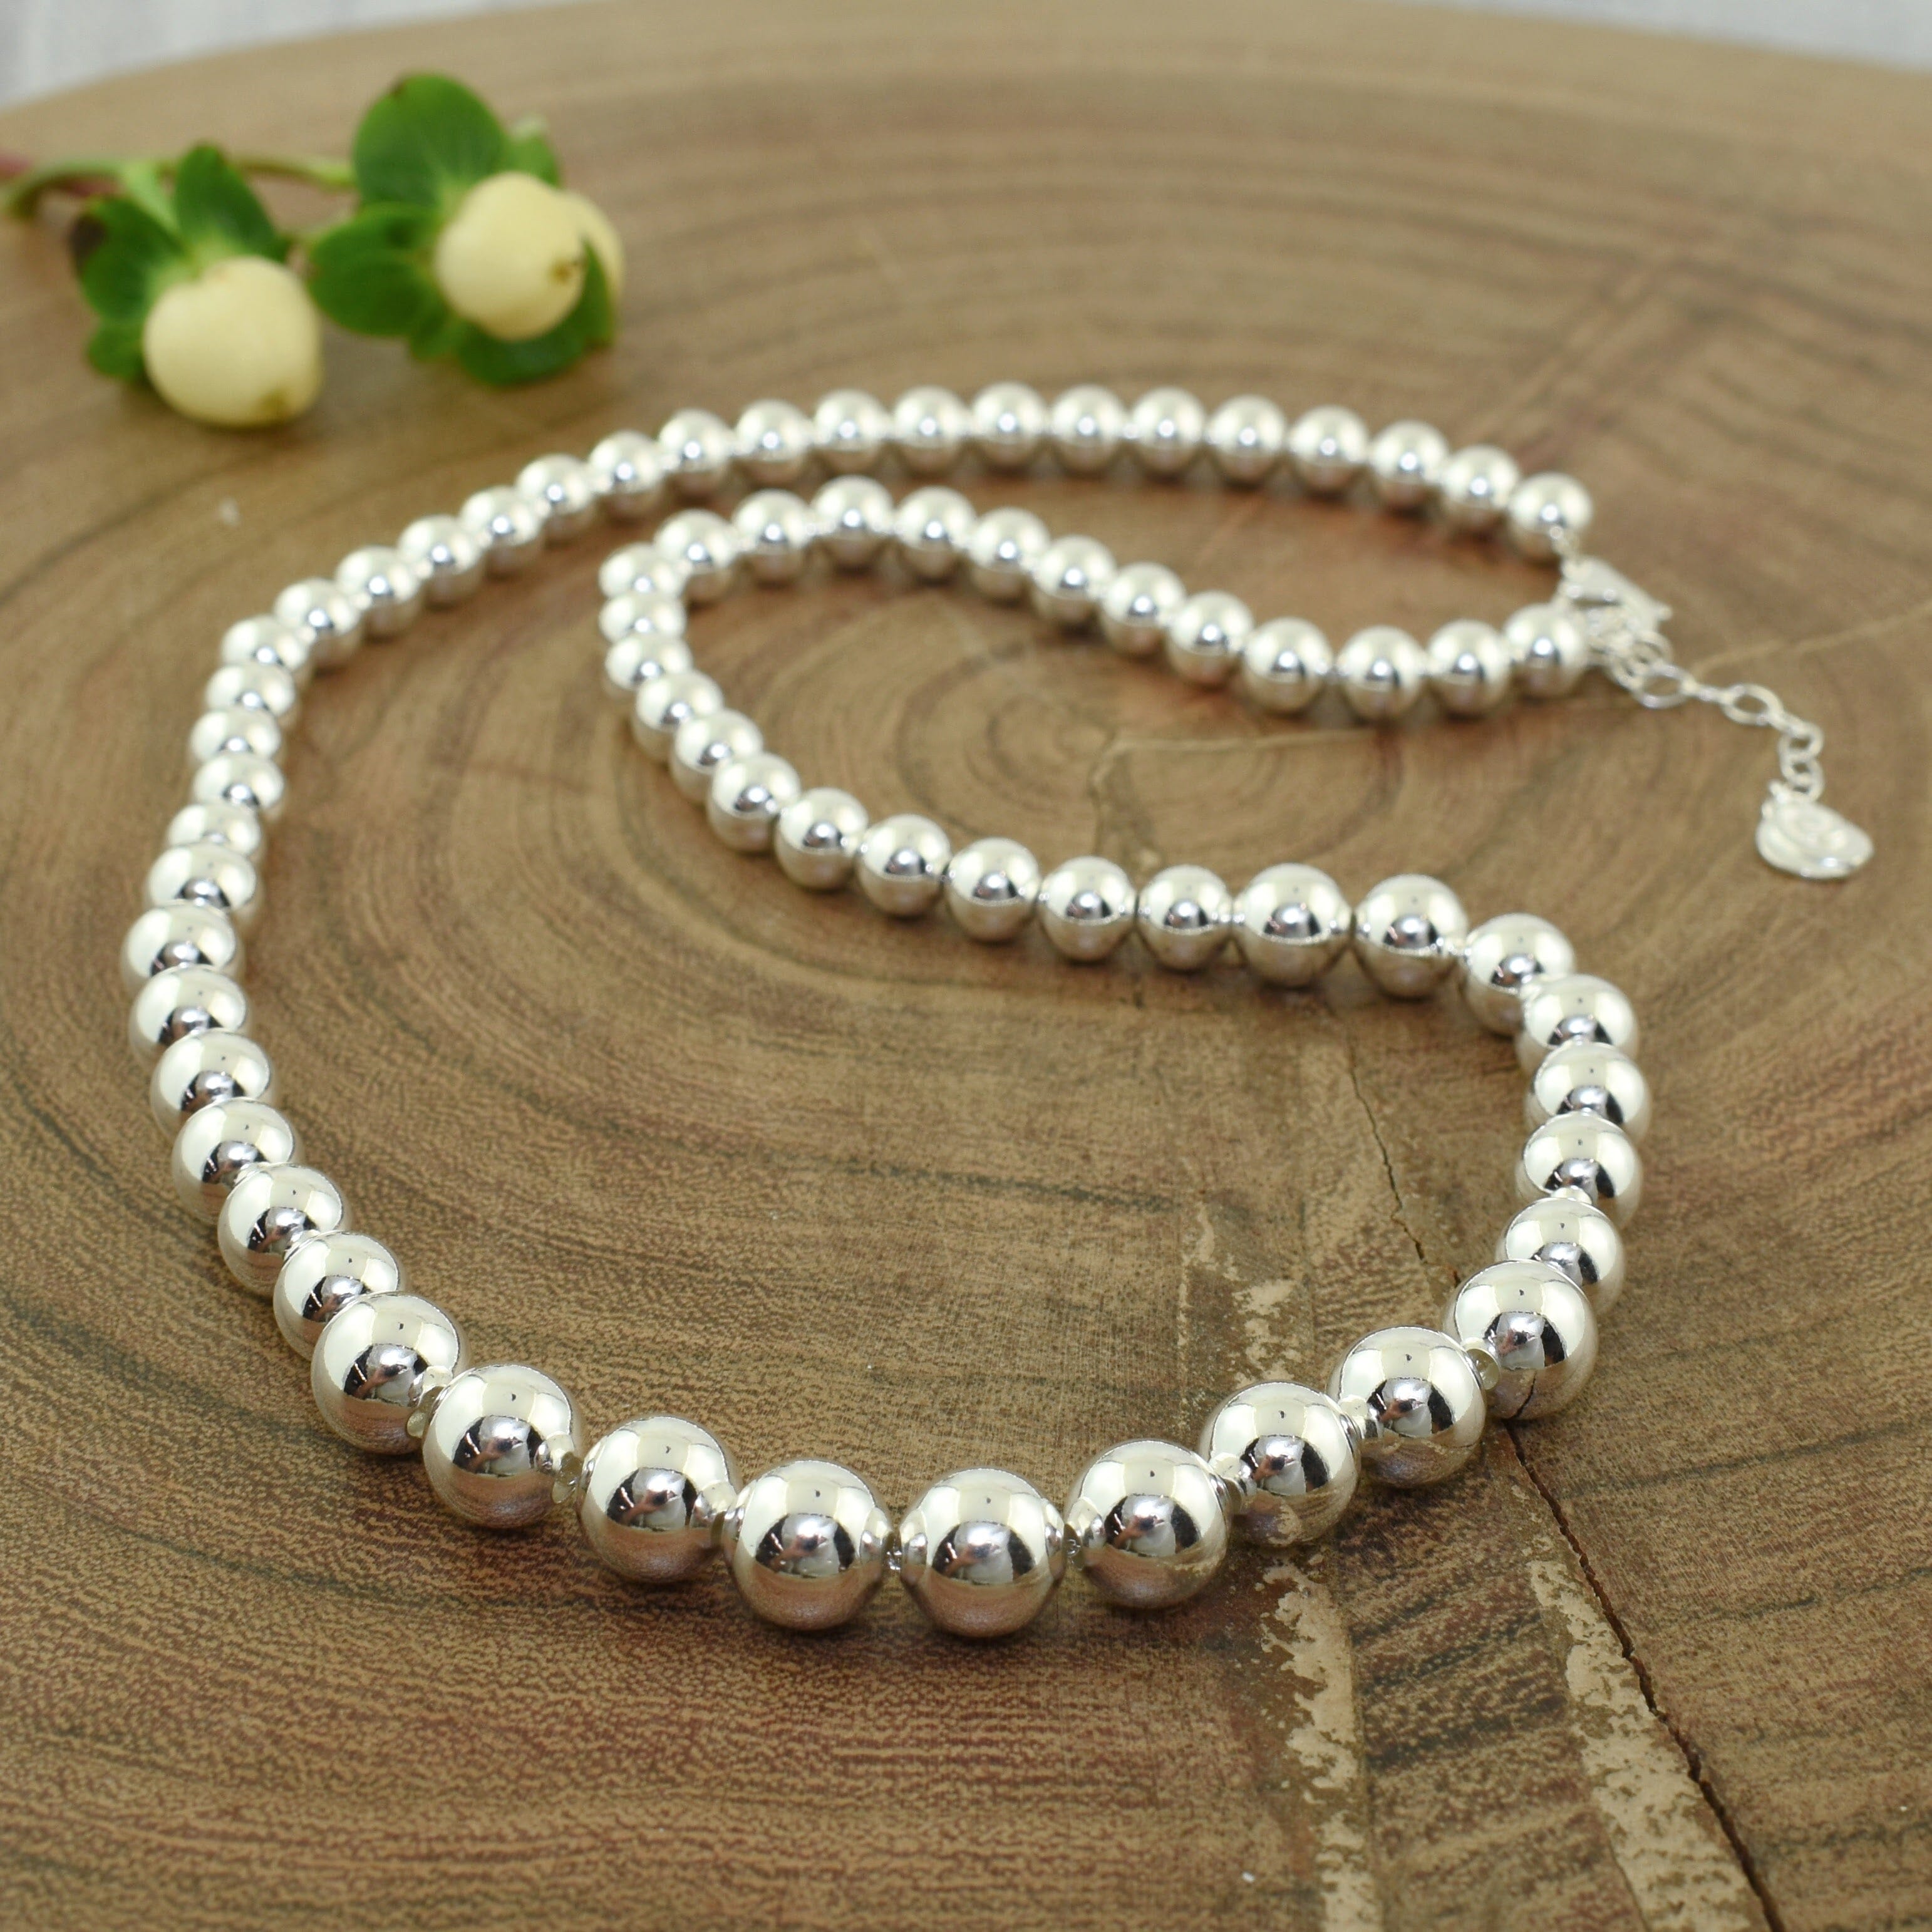 Beaded sterling silver necklace